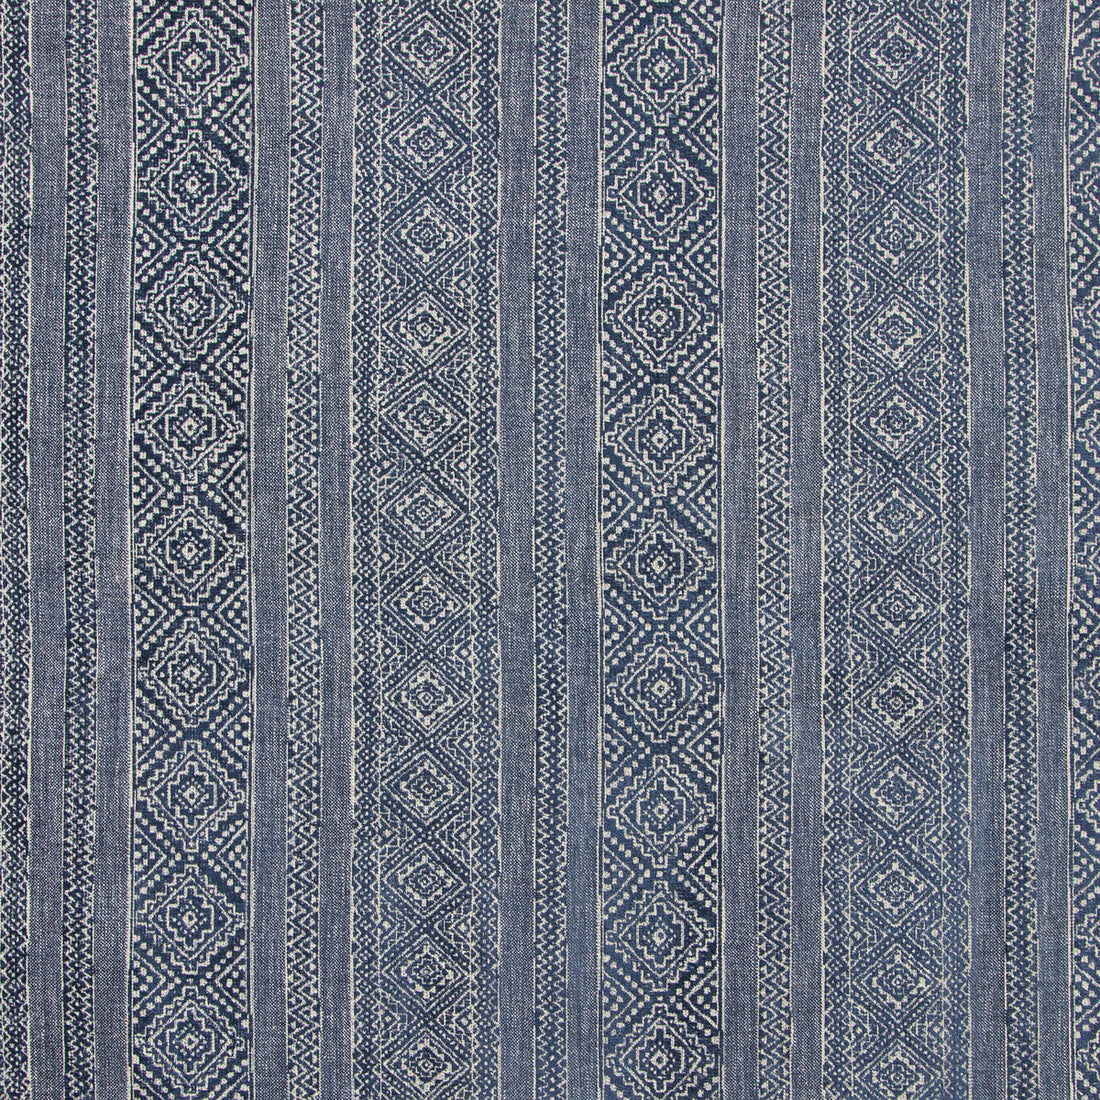 Wanderwide fabric in navy color - pattern 35562.51.0 - by Kravet Couture in the Modern Colors-Sojourn Collection collection